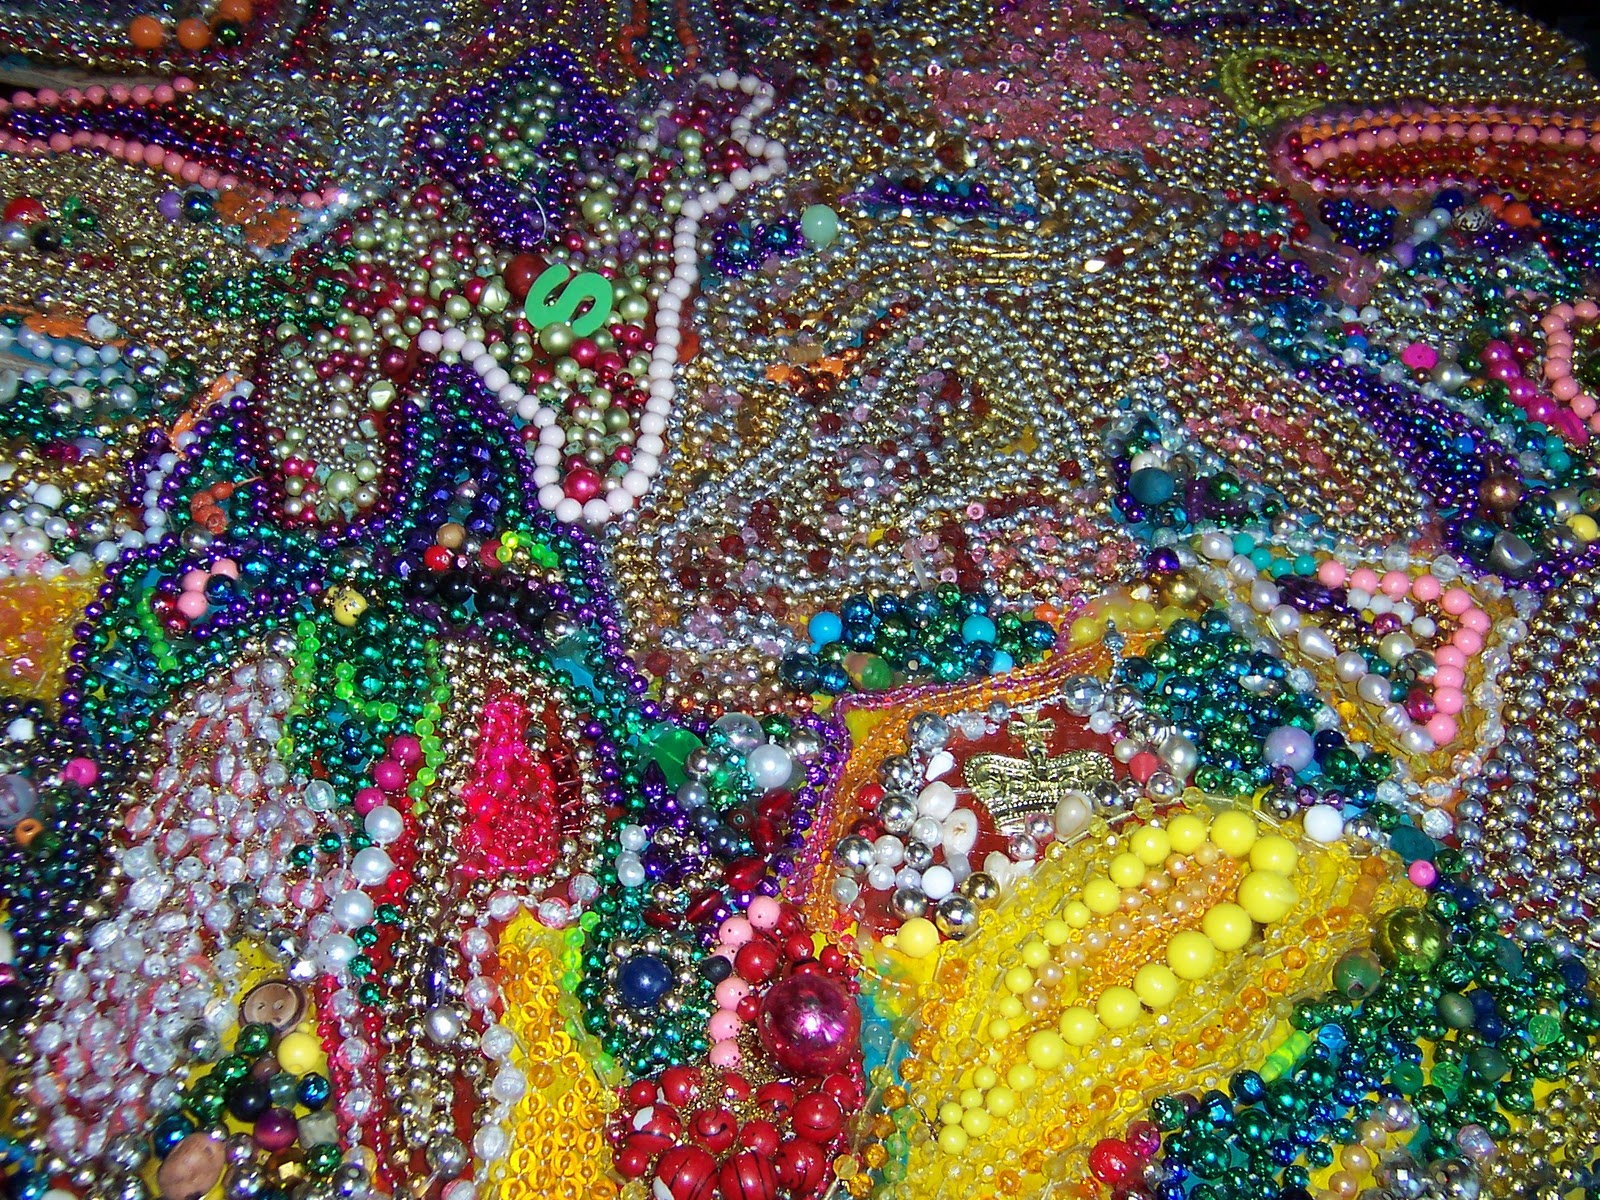 Trow me sumtin mista! Dats what we say when trying to catch Mardi Gras beads.